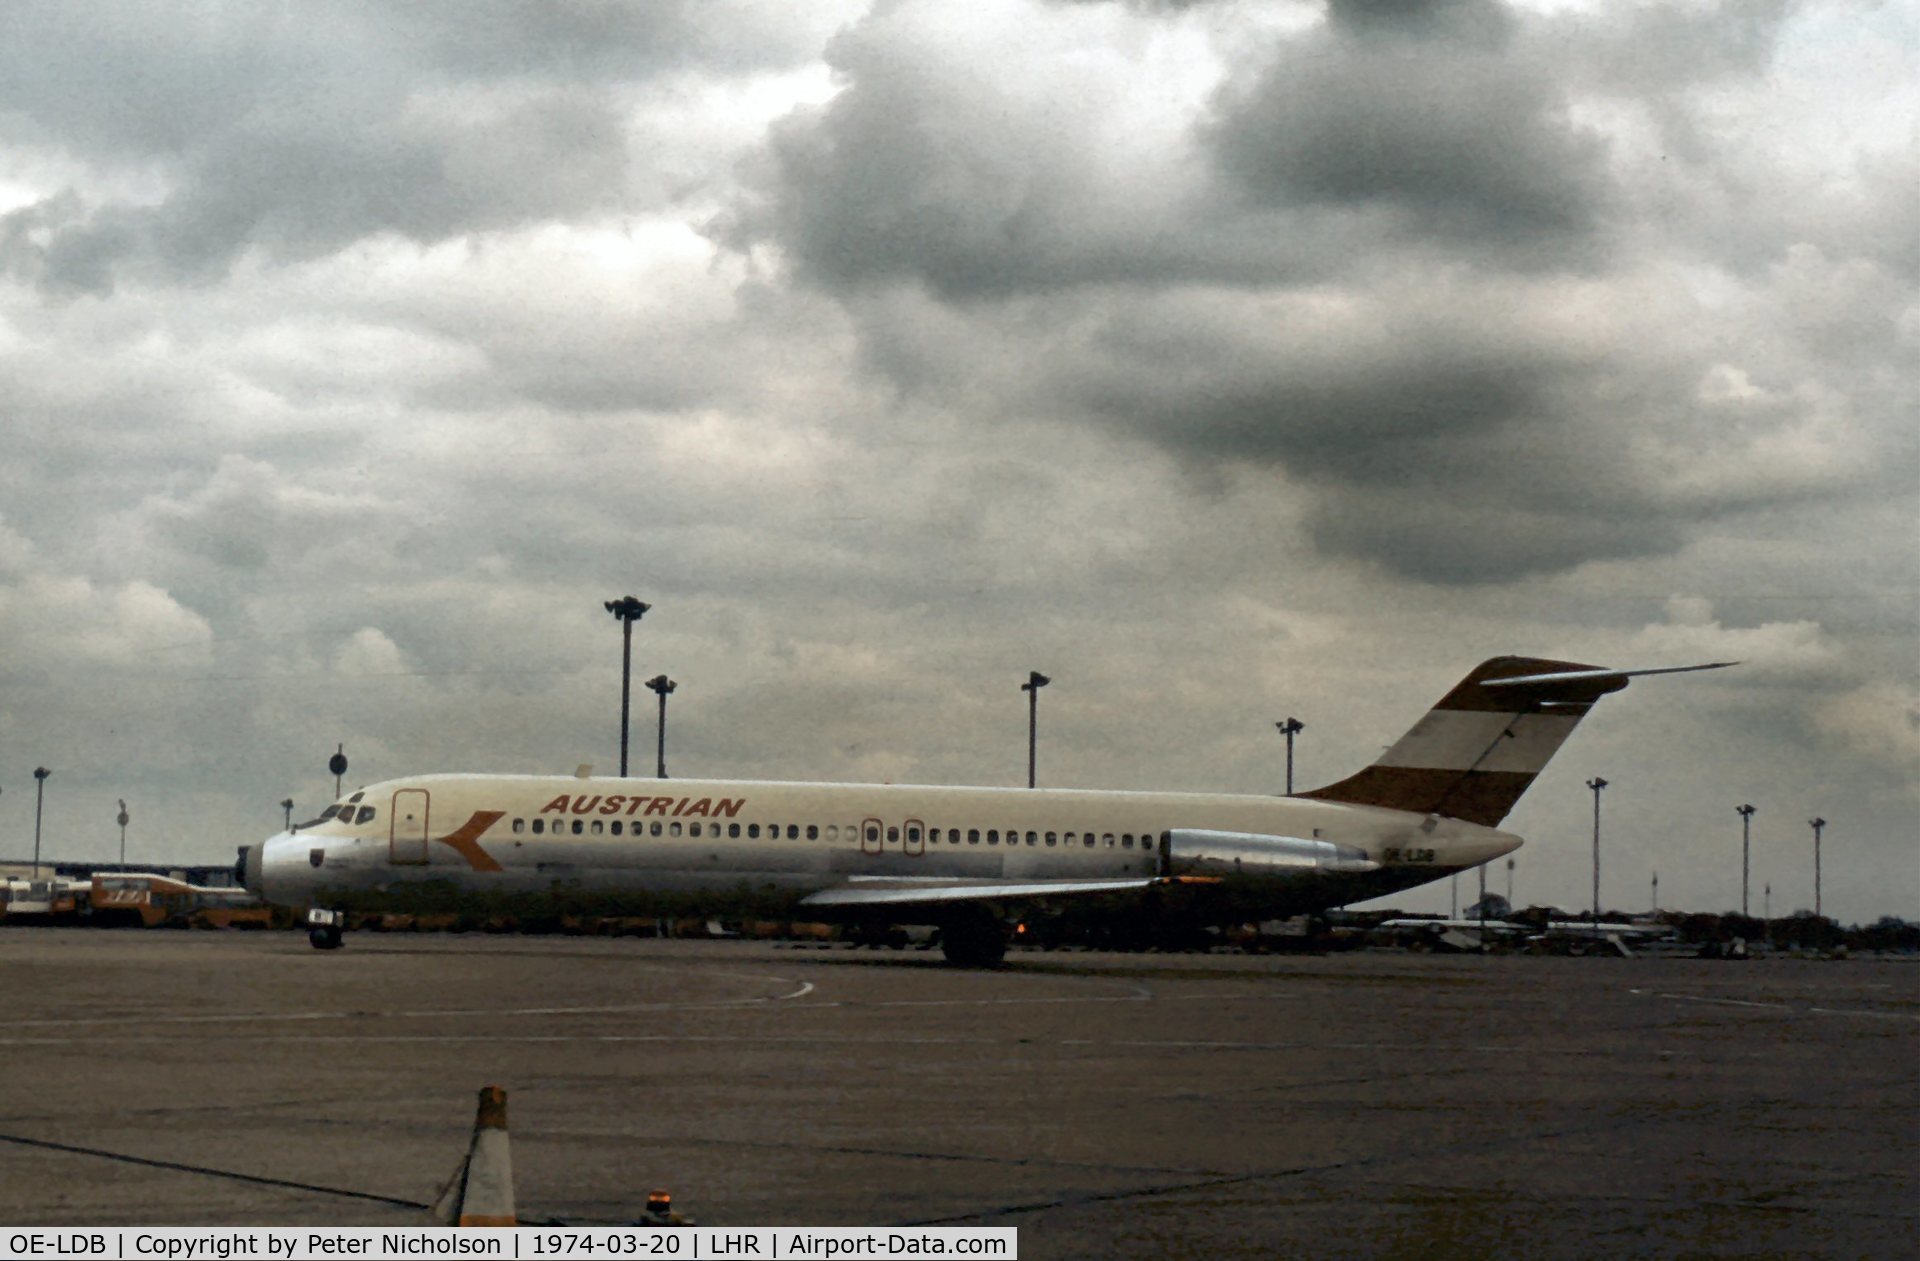 OE-LDB, 1971 Douglas DC-9-32 C/N 47524, DC-9-32 of Austrian Airlines taxying to the terminal at Heathrow in March 1974.